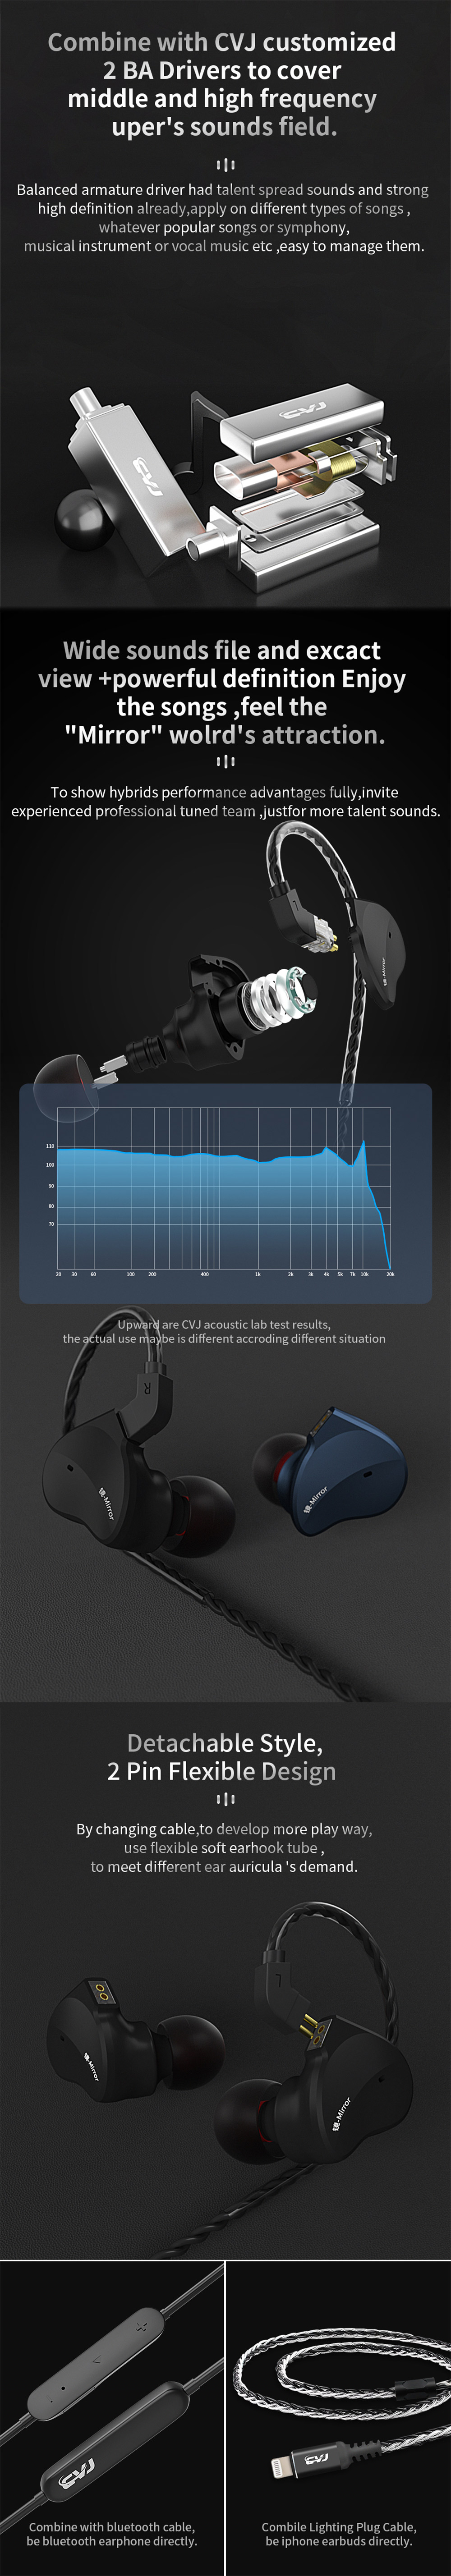 CVJ Mirror Wired Earphones Monitor Original HiFi Sound 2BA Drivers+10mm Big Dynamic Driver Ergonomic Noise Reduction Earbuds 3.5MM Sports Music Gaming In-Ear Headphones with Mic